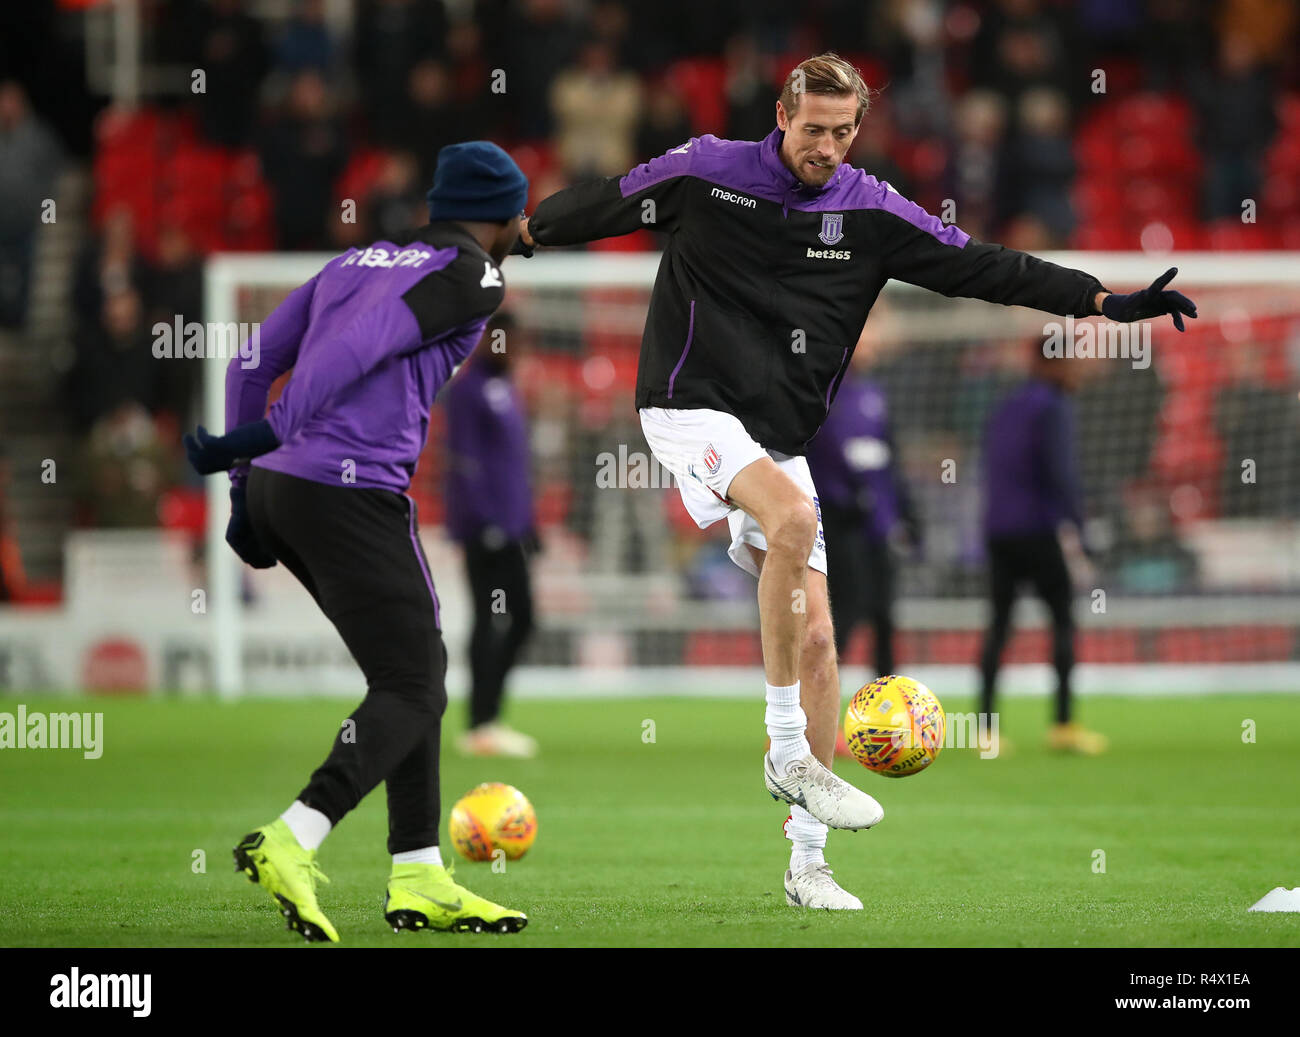 Stoke City's Peter Crouch warms up before the Sky Bet Championship match at the bet365 Stadium, Stoke. PRESS ASSOCIATION Photo. Picture date: Wednesday November 28, 2018. See PA story SOCCER Stoke. Photo credit should read: Tim Goode/PA Wire. RESTRICTIONS: No use with unauthorised audio, video, data, fixture lists, club/league logos or 'live' services. Online in-match use limited to 120 images, no video emulation. No use in betting, games or single club/league/player publications. Stock Photo